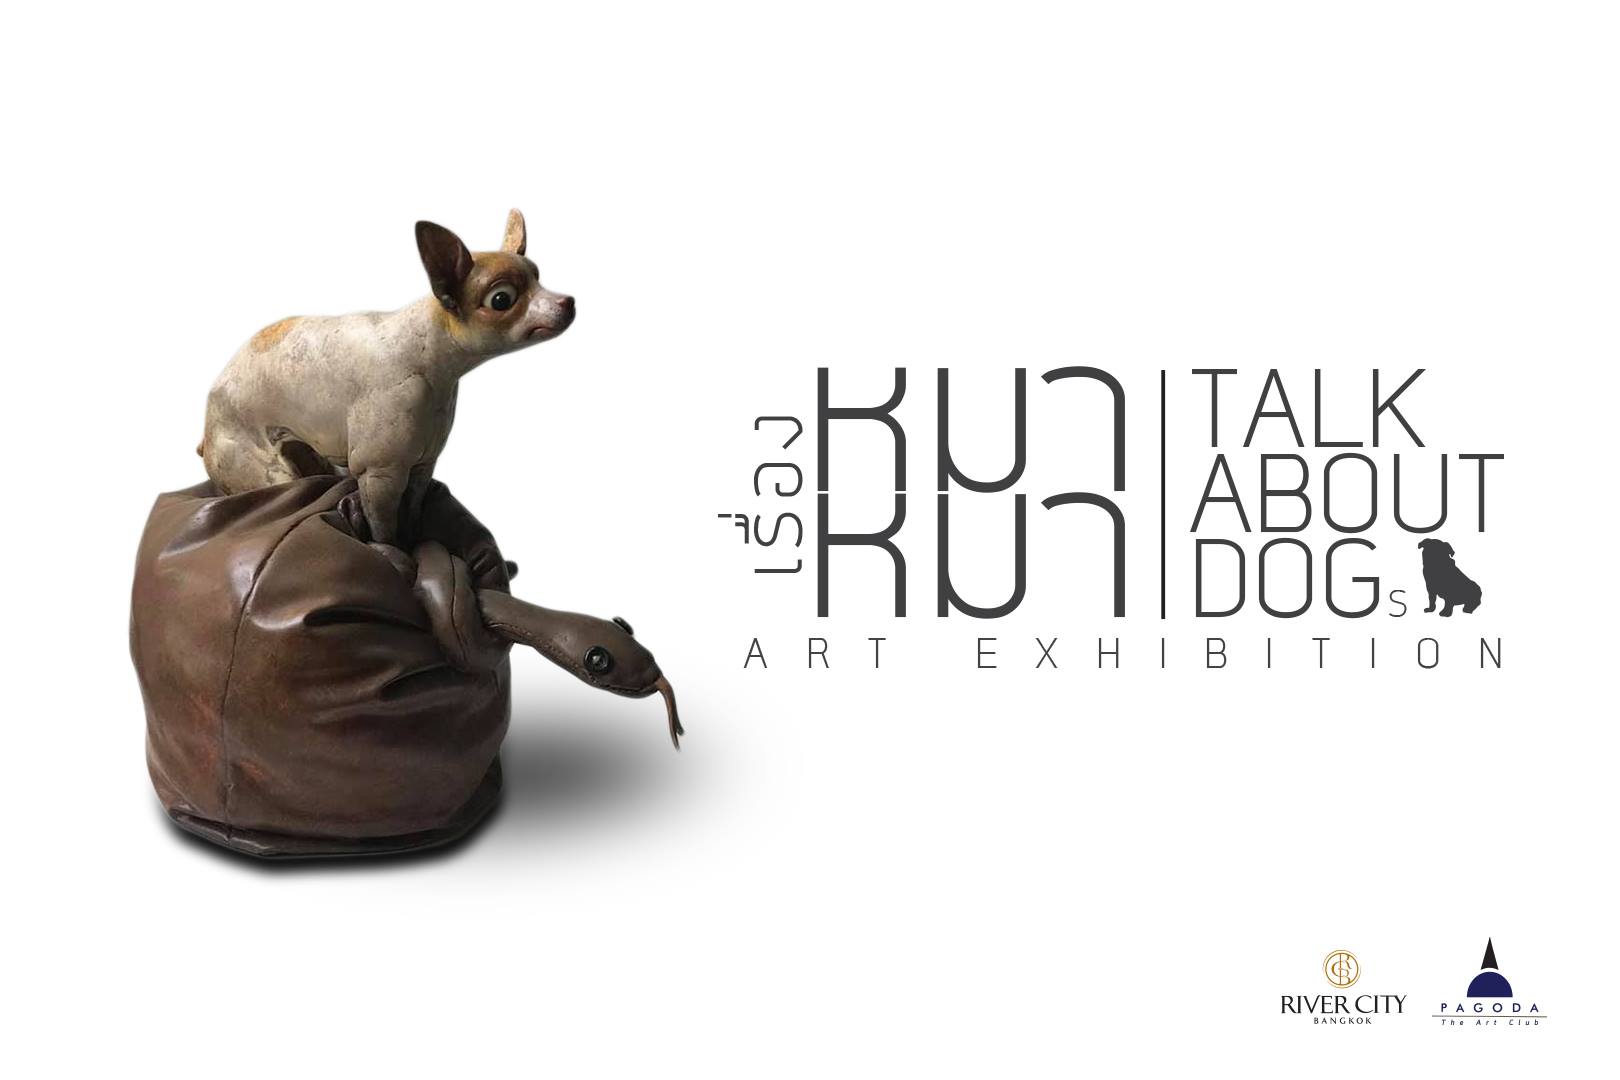 Group Art Exhibition “Talk about dog” in Bangkok, Thailand